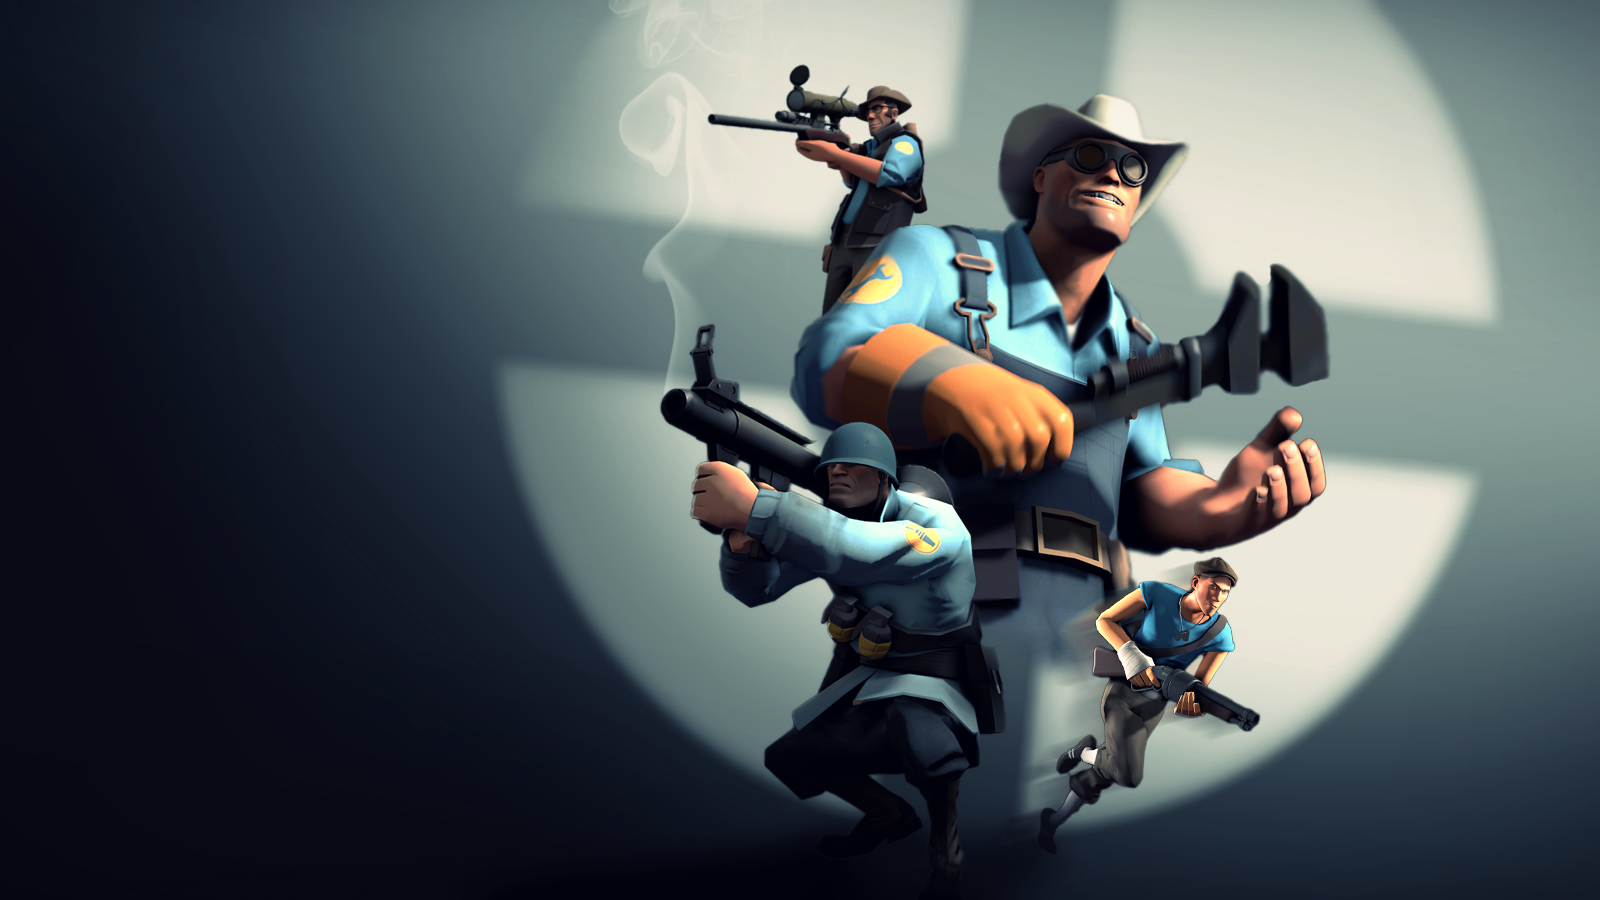 Some of my favorite TF2 wallpaper. Cactus Jack is on CRACK!!